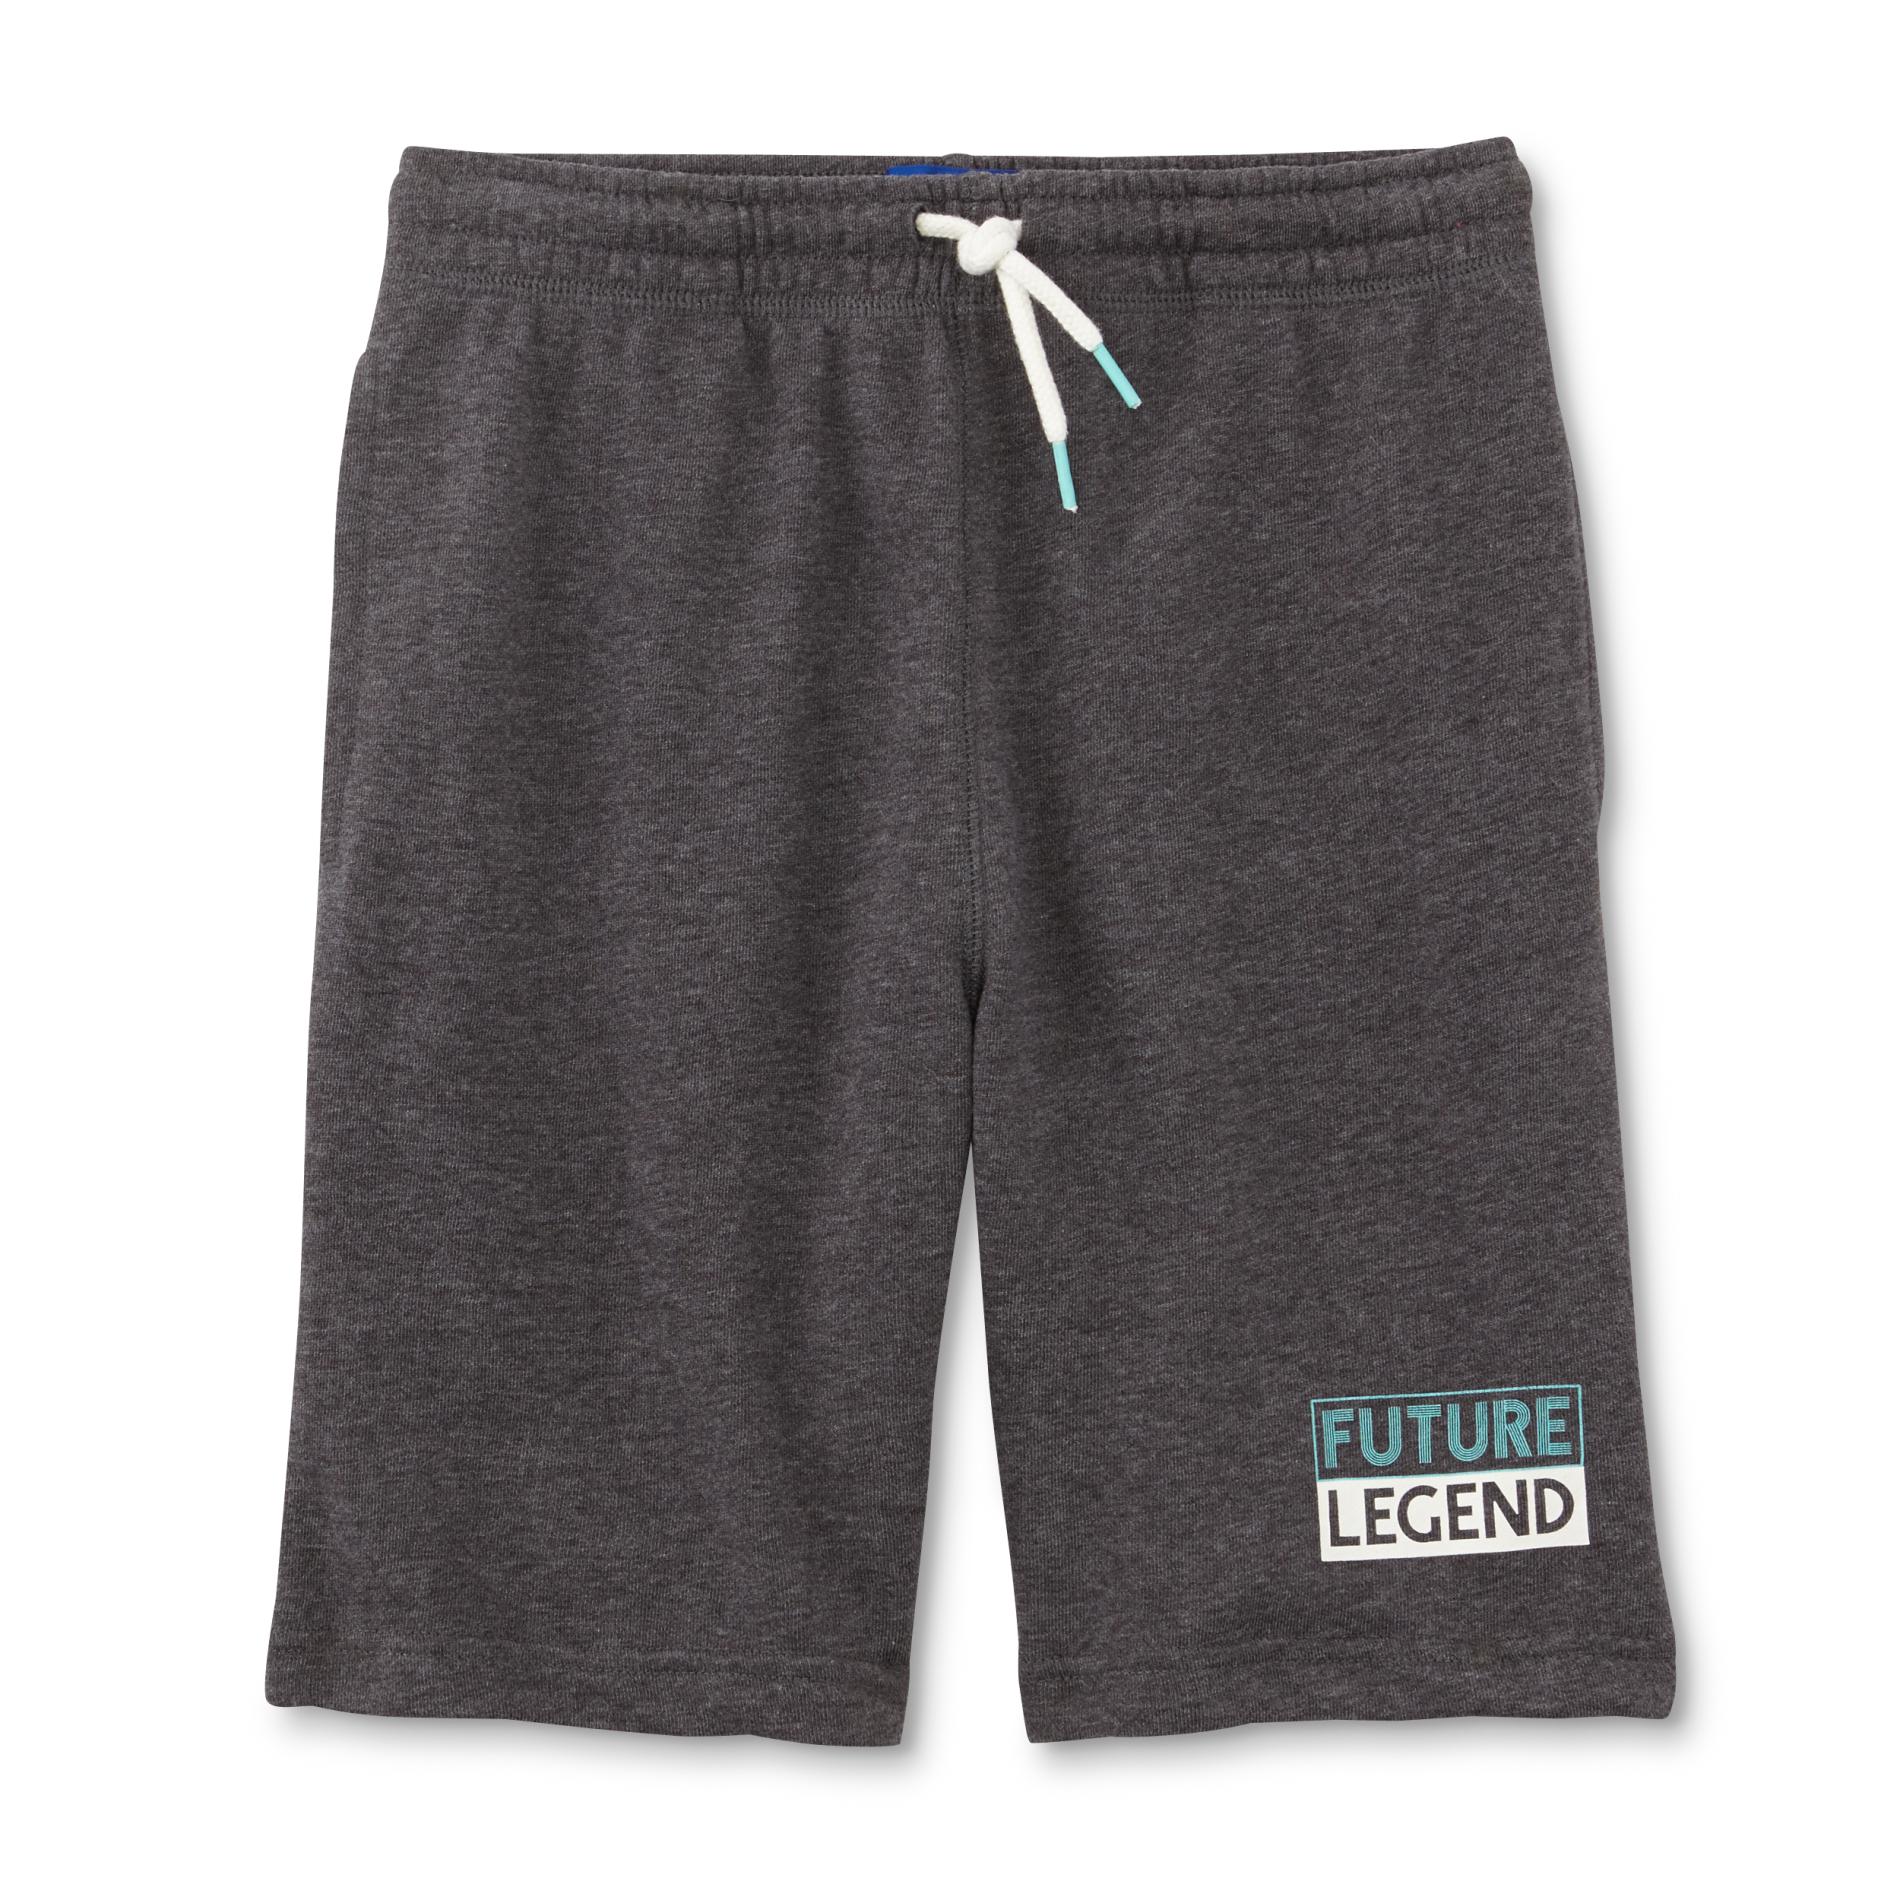 Simply Styled Boys' Knit Shorts - Future Legend